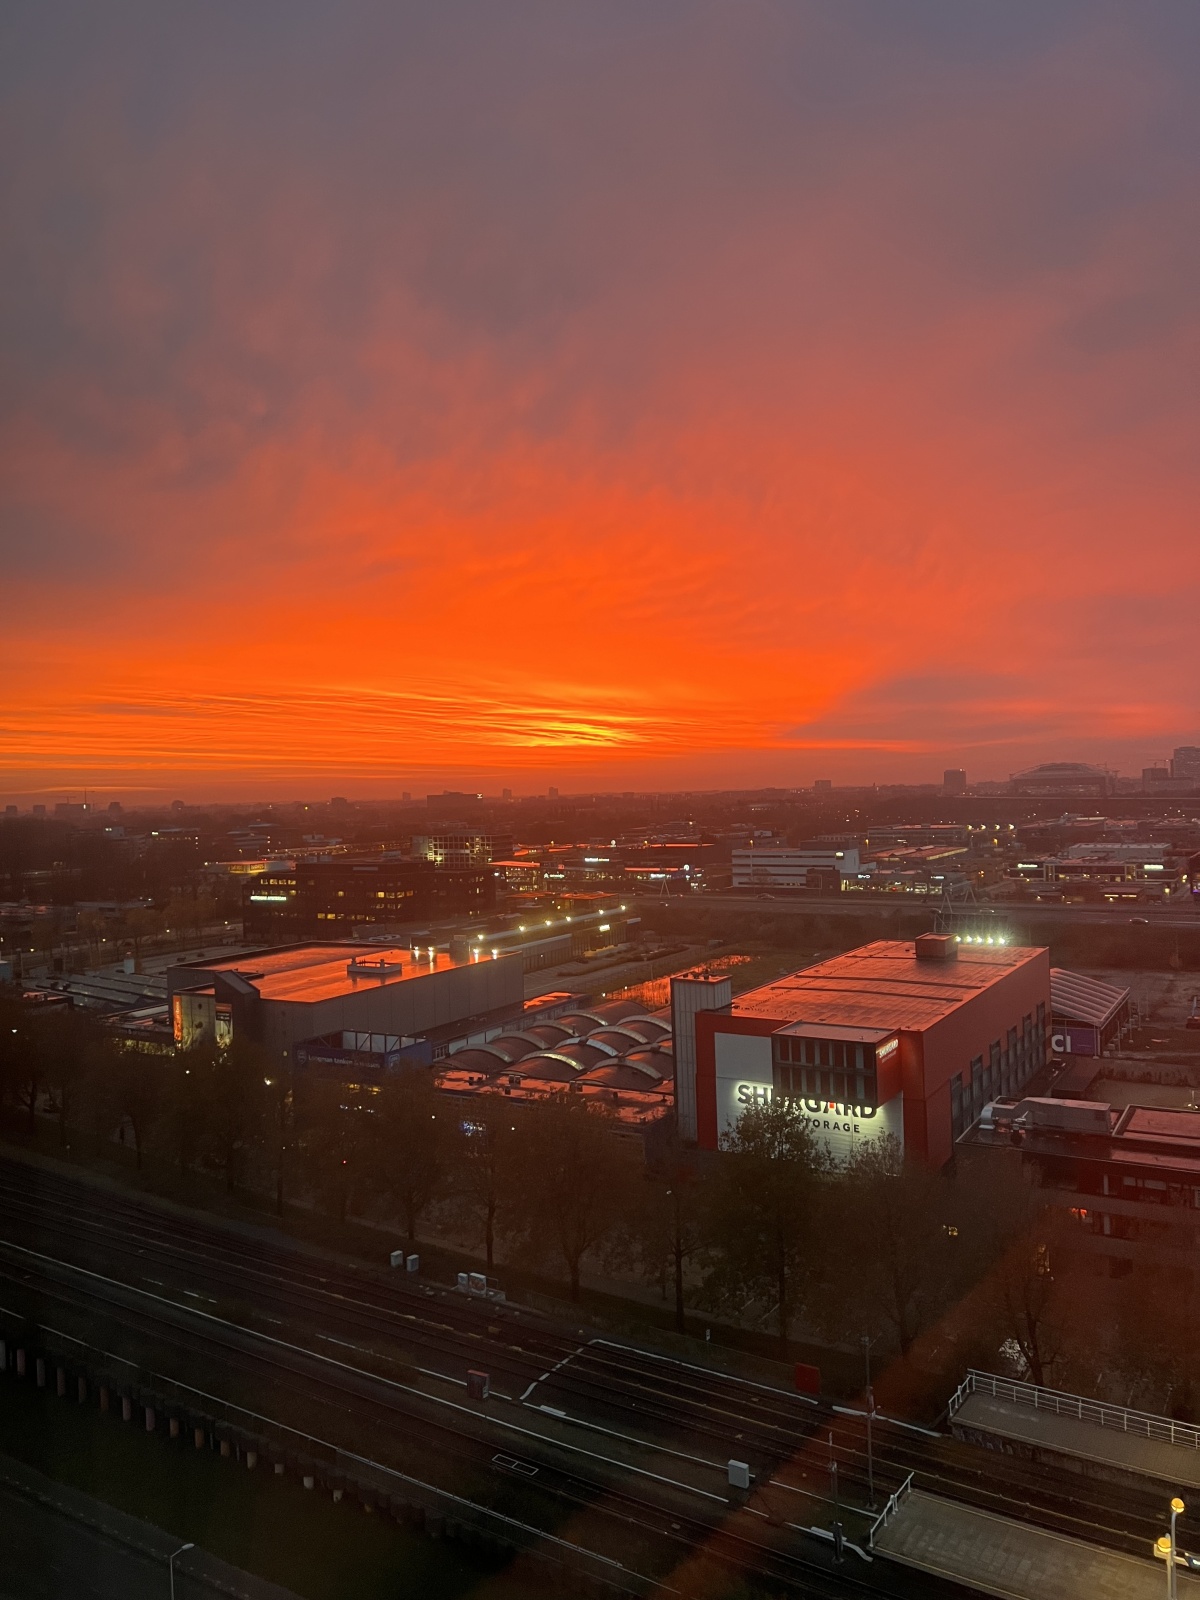 A breathtaking sunrise over Overamstel with a rich gradient of red and orange filling the sky above the cityscape and railway tracks, as seen from the Leonardo Hotel room. The canal is not visible in the shot.